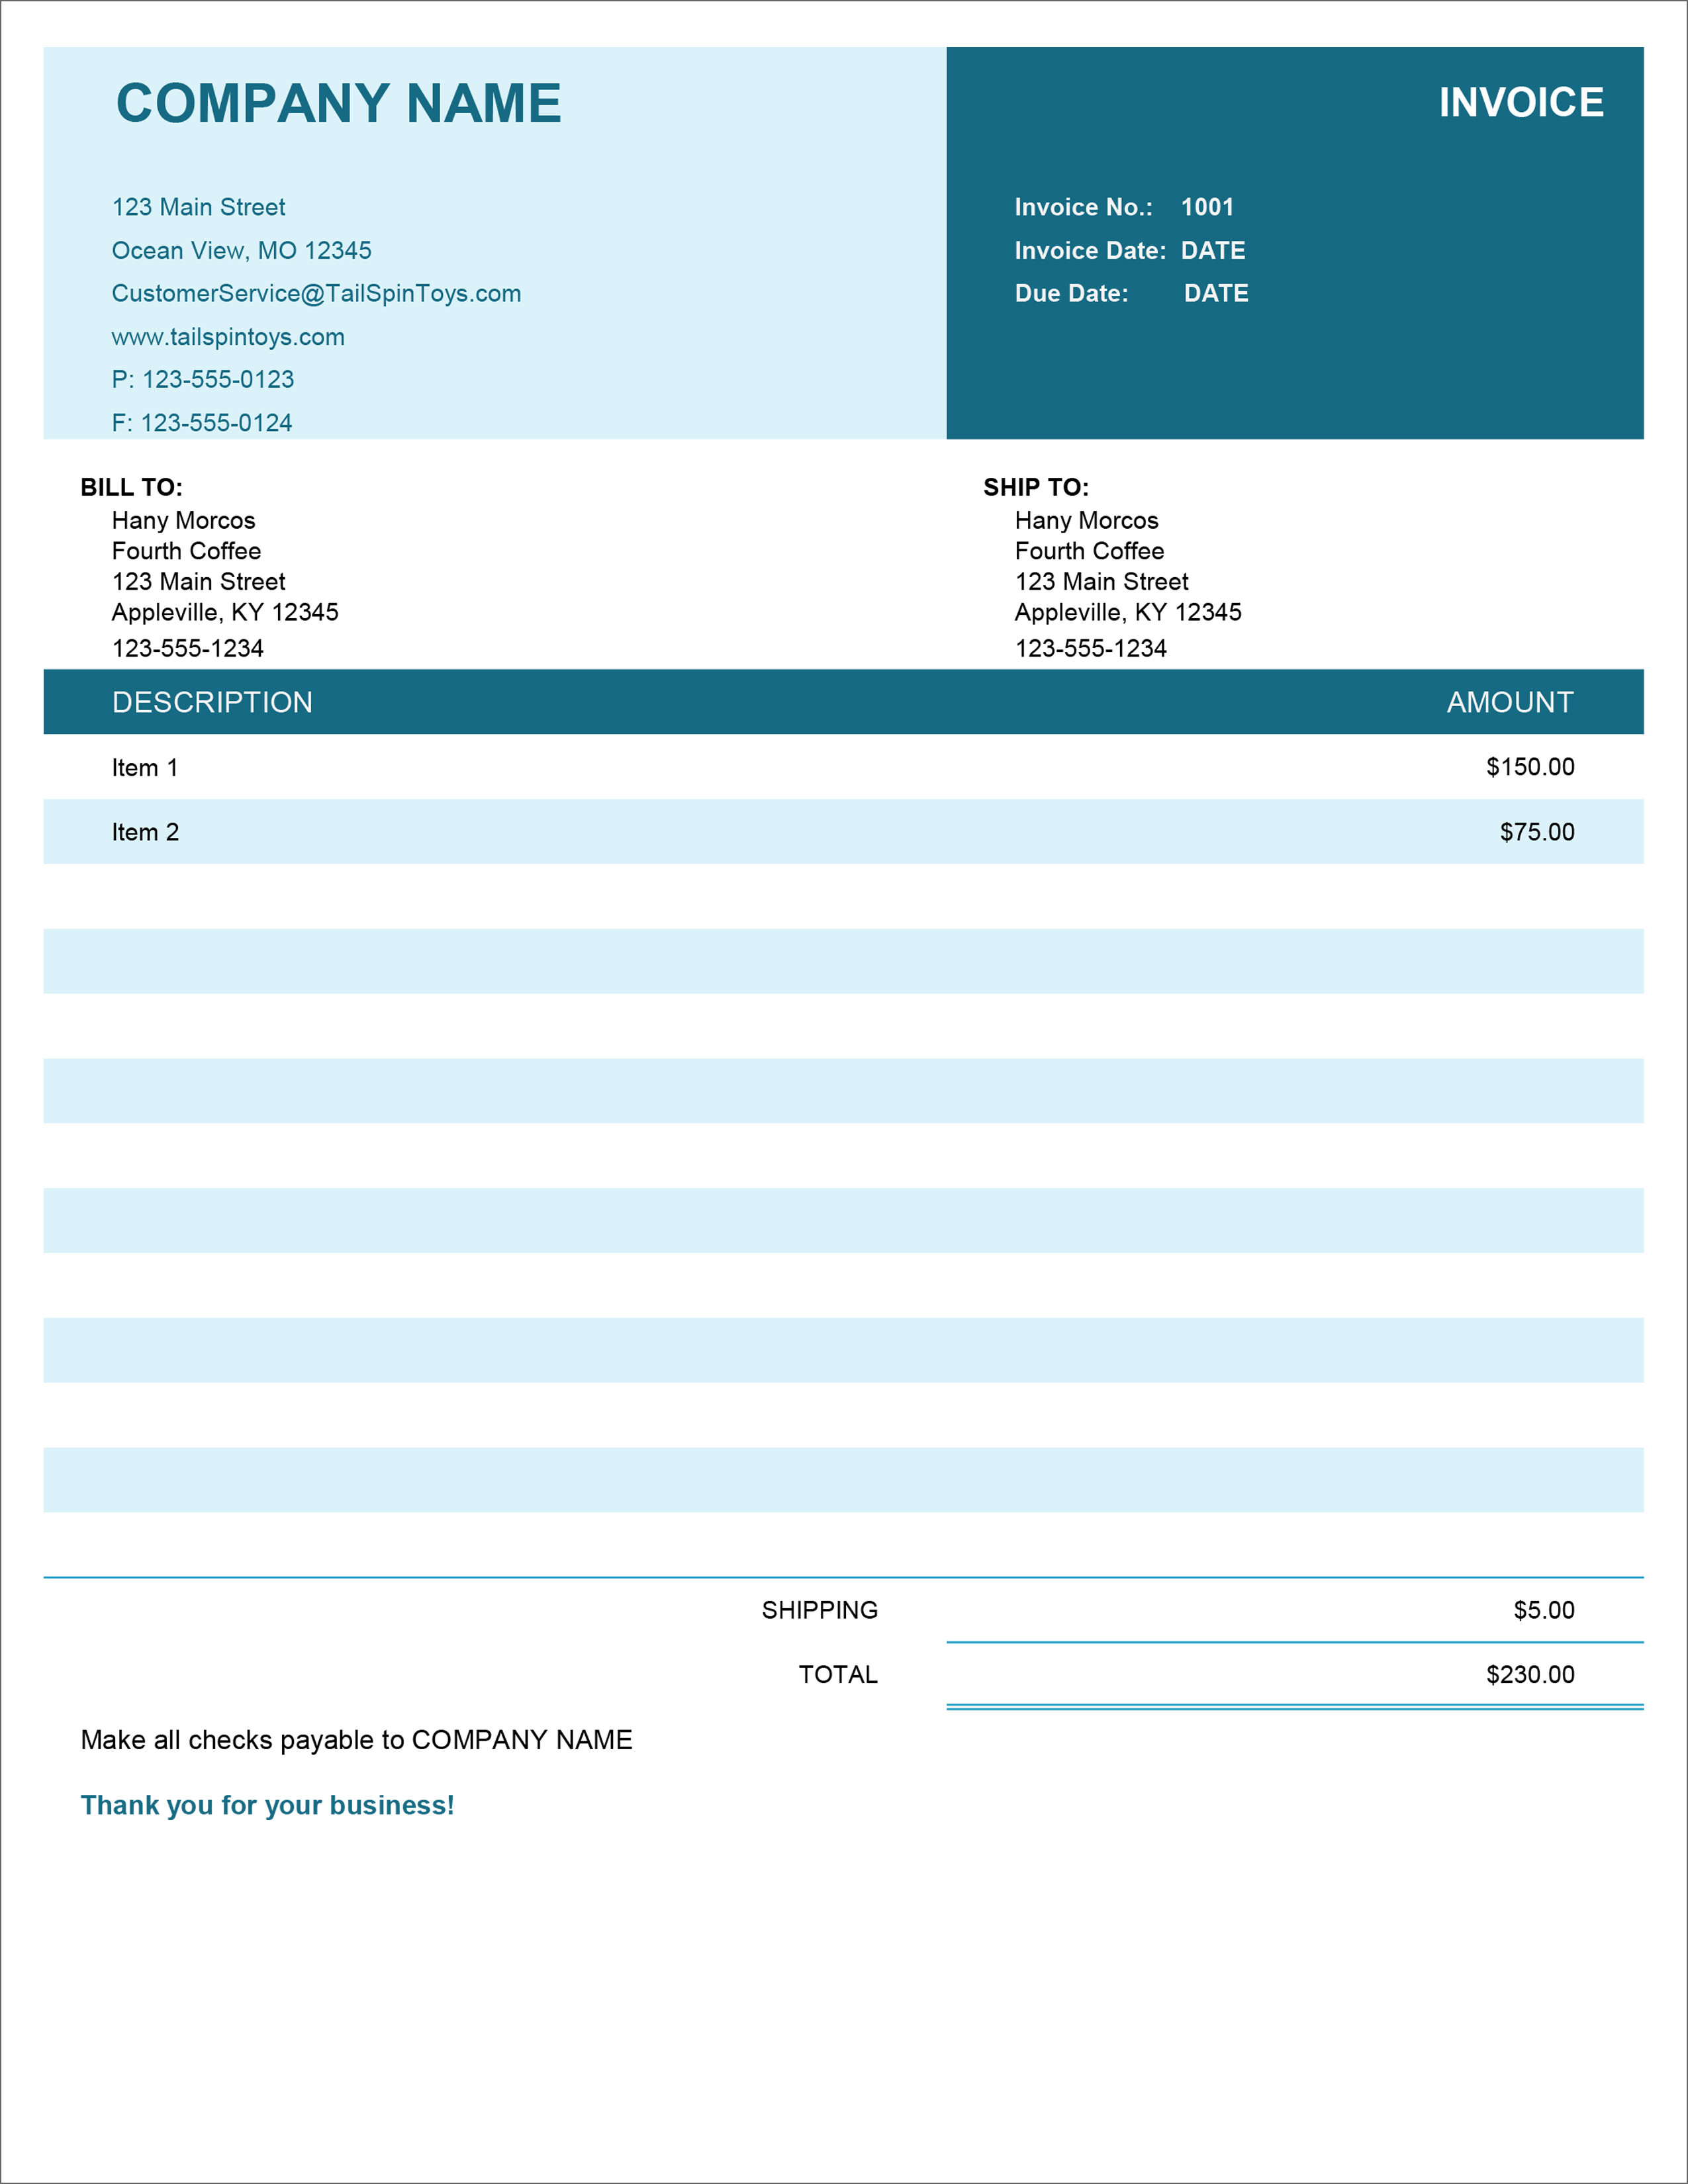 22 Free Invoice Templates In Microsoft Excel And DOCX Formats Regarding Microsoft Office Word Invoice Template